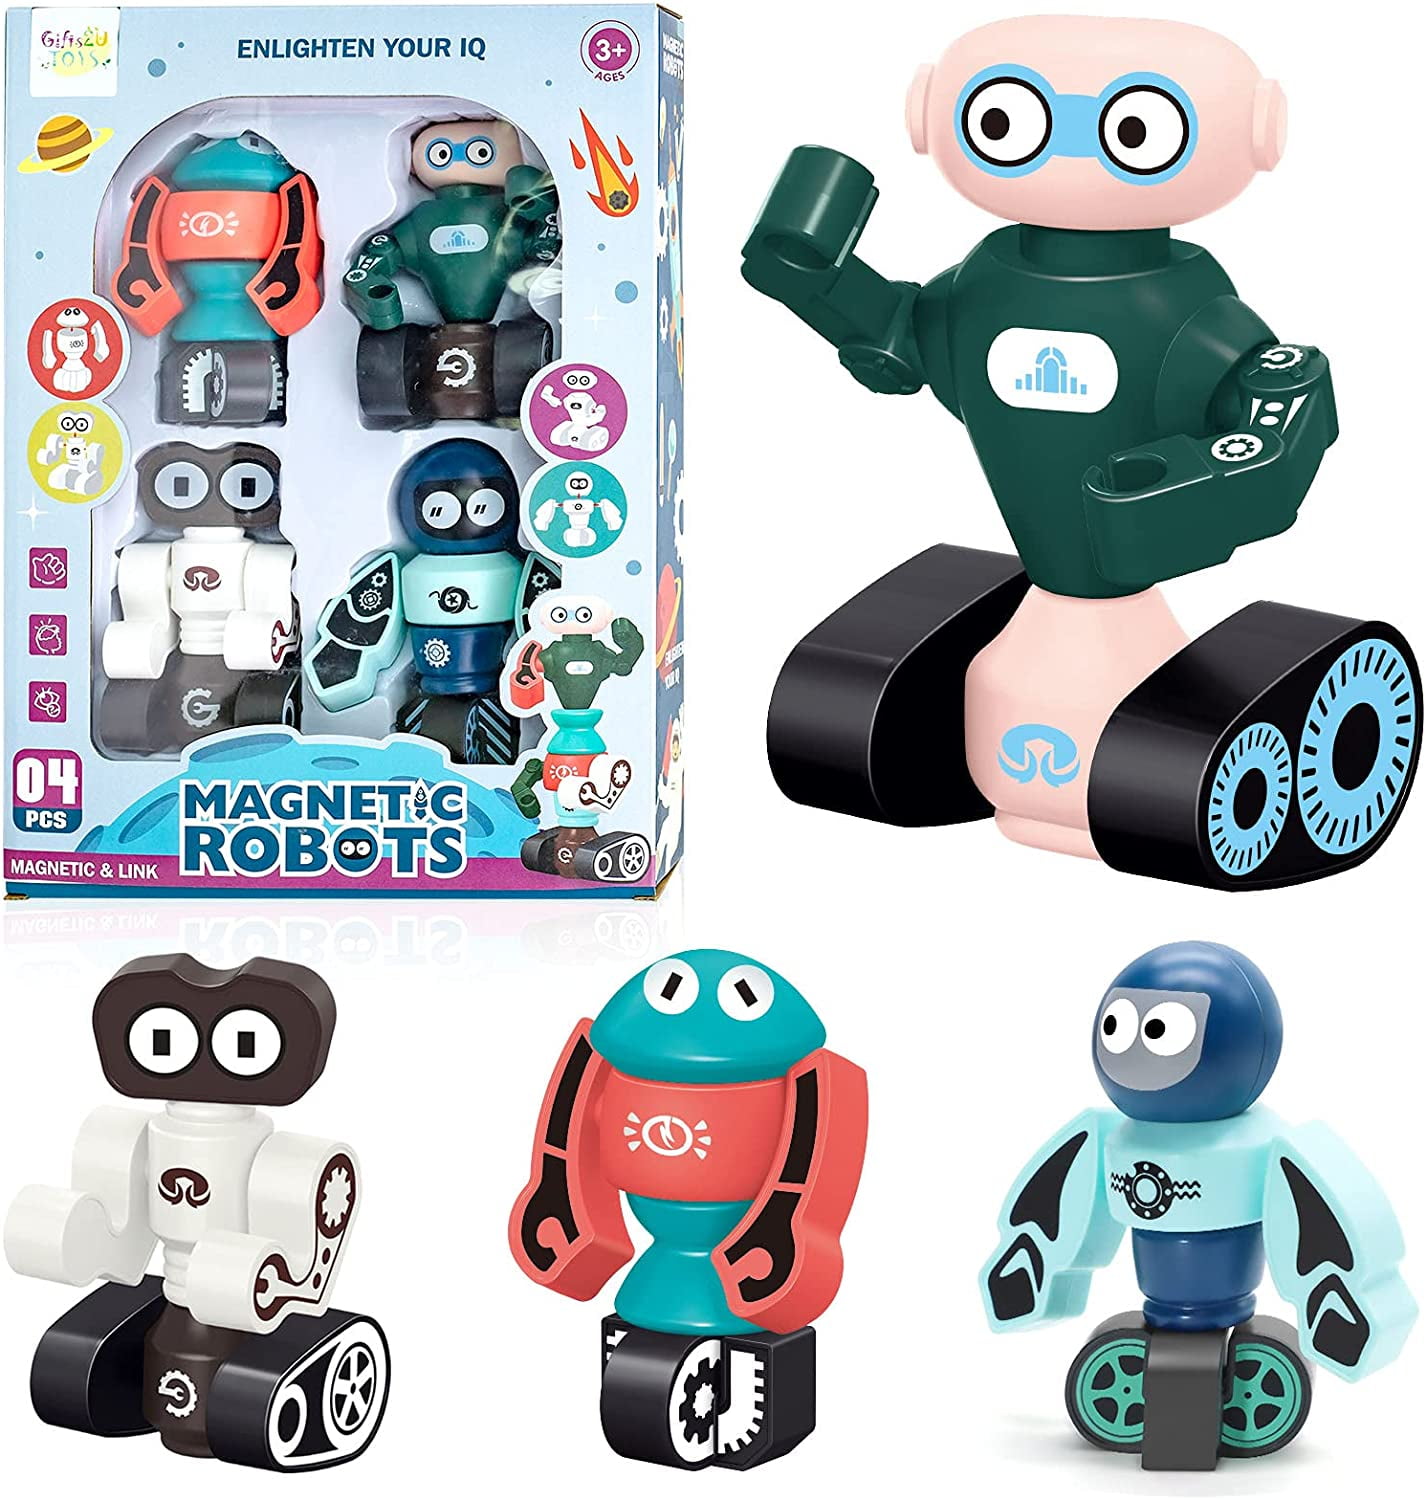 Magnetic Robots Toy, Kids Robot Blocks Robots STEM Educational Playset Learning Story Bots Travel Gift for Age 3 4 5 Years Old Boys and Preschool Toddlers - Walmart.com